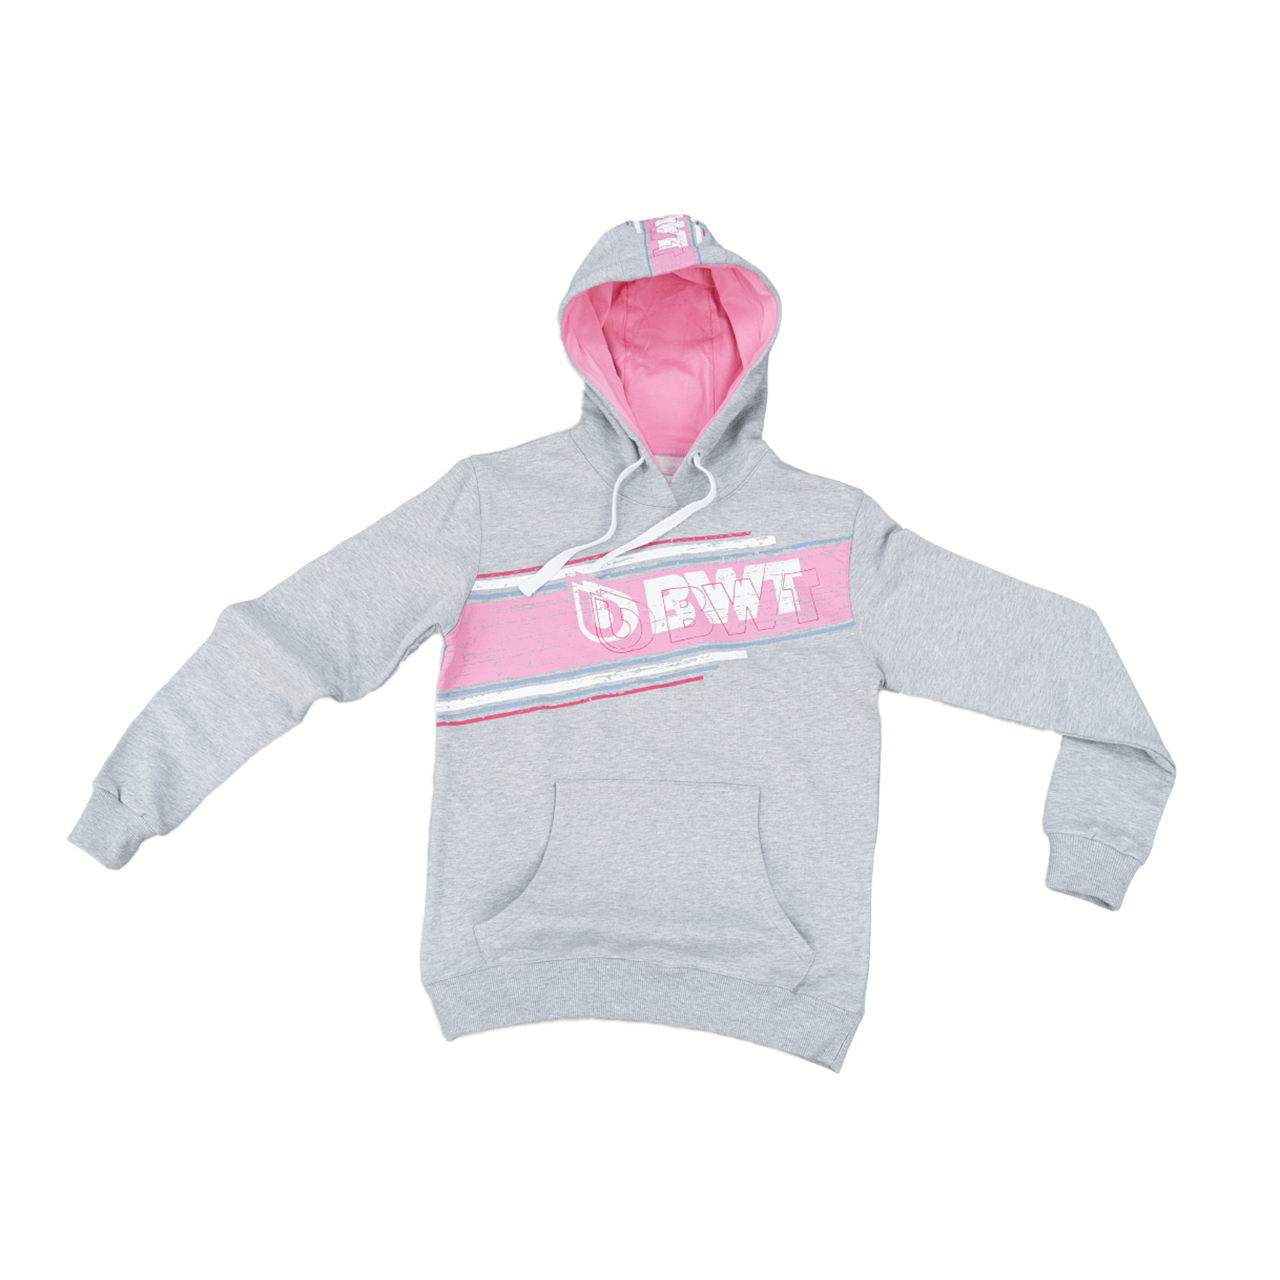 BWT Lifestyle Hoodie men grey with white BWT logo on pink background